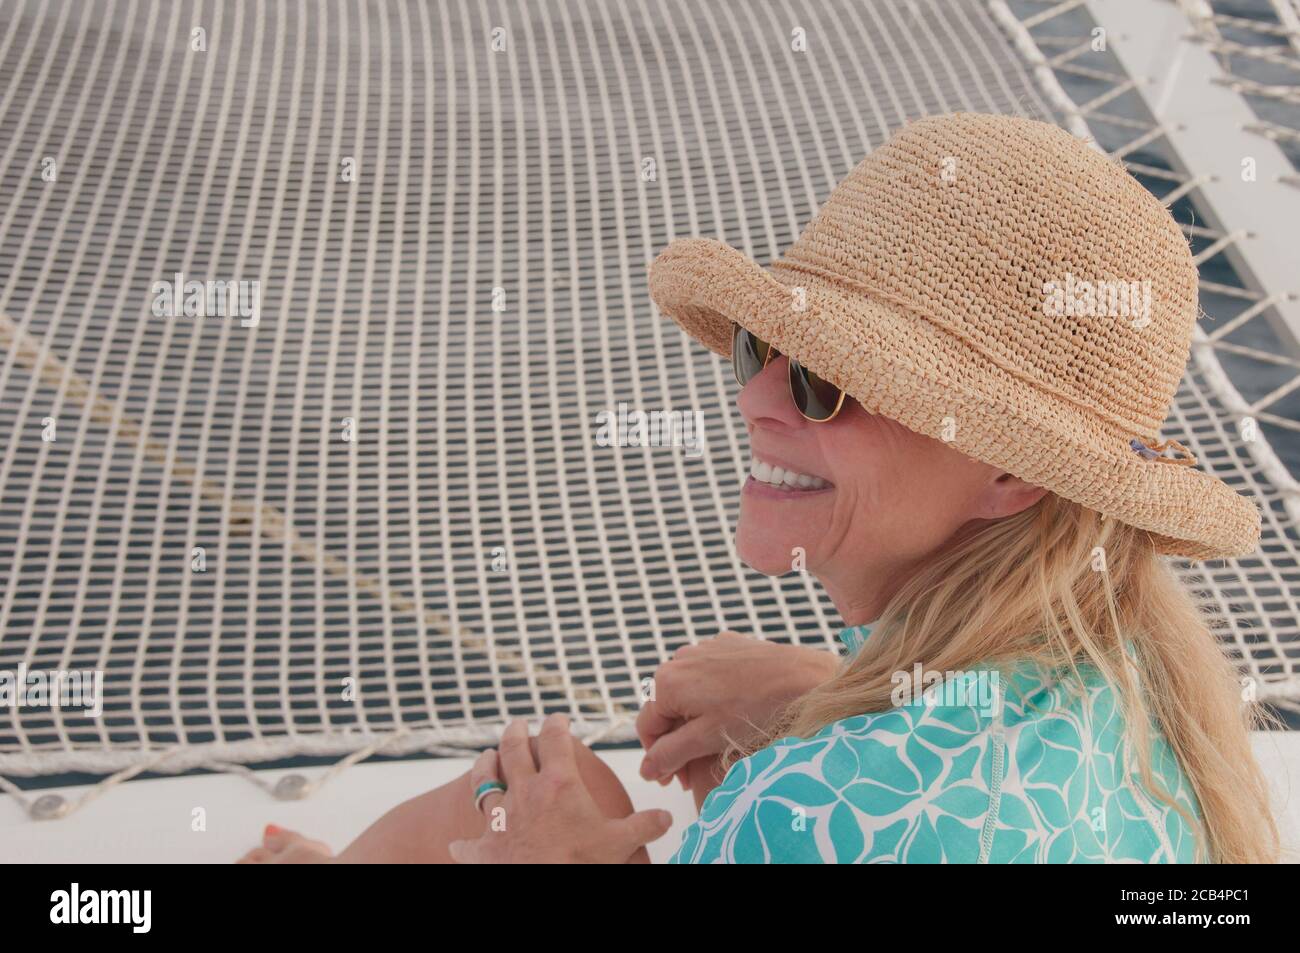 Happy outside. 60-year old active senior mature woman in straw hat on a boat smiling with big smile and white teeth. Happy retirement. Model release. Stock Photo